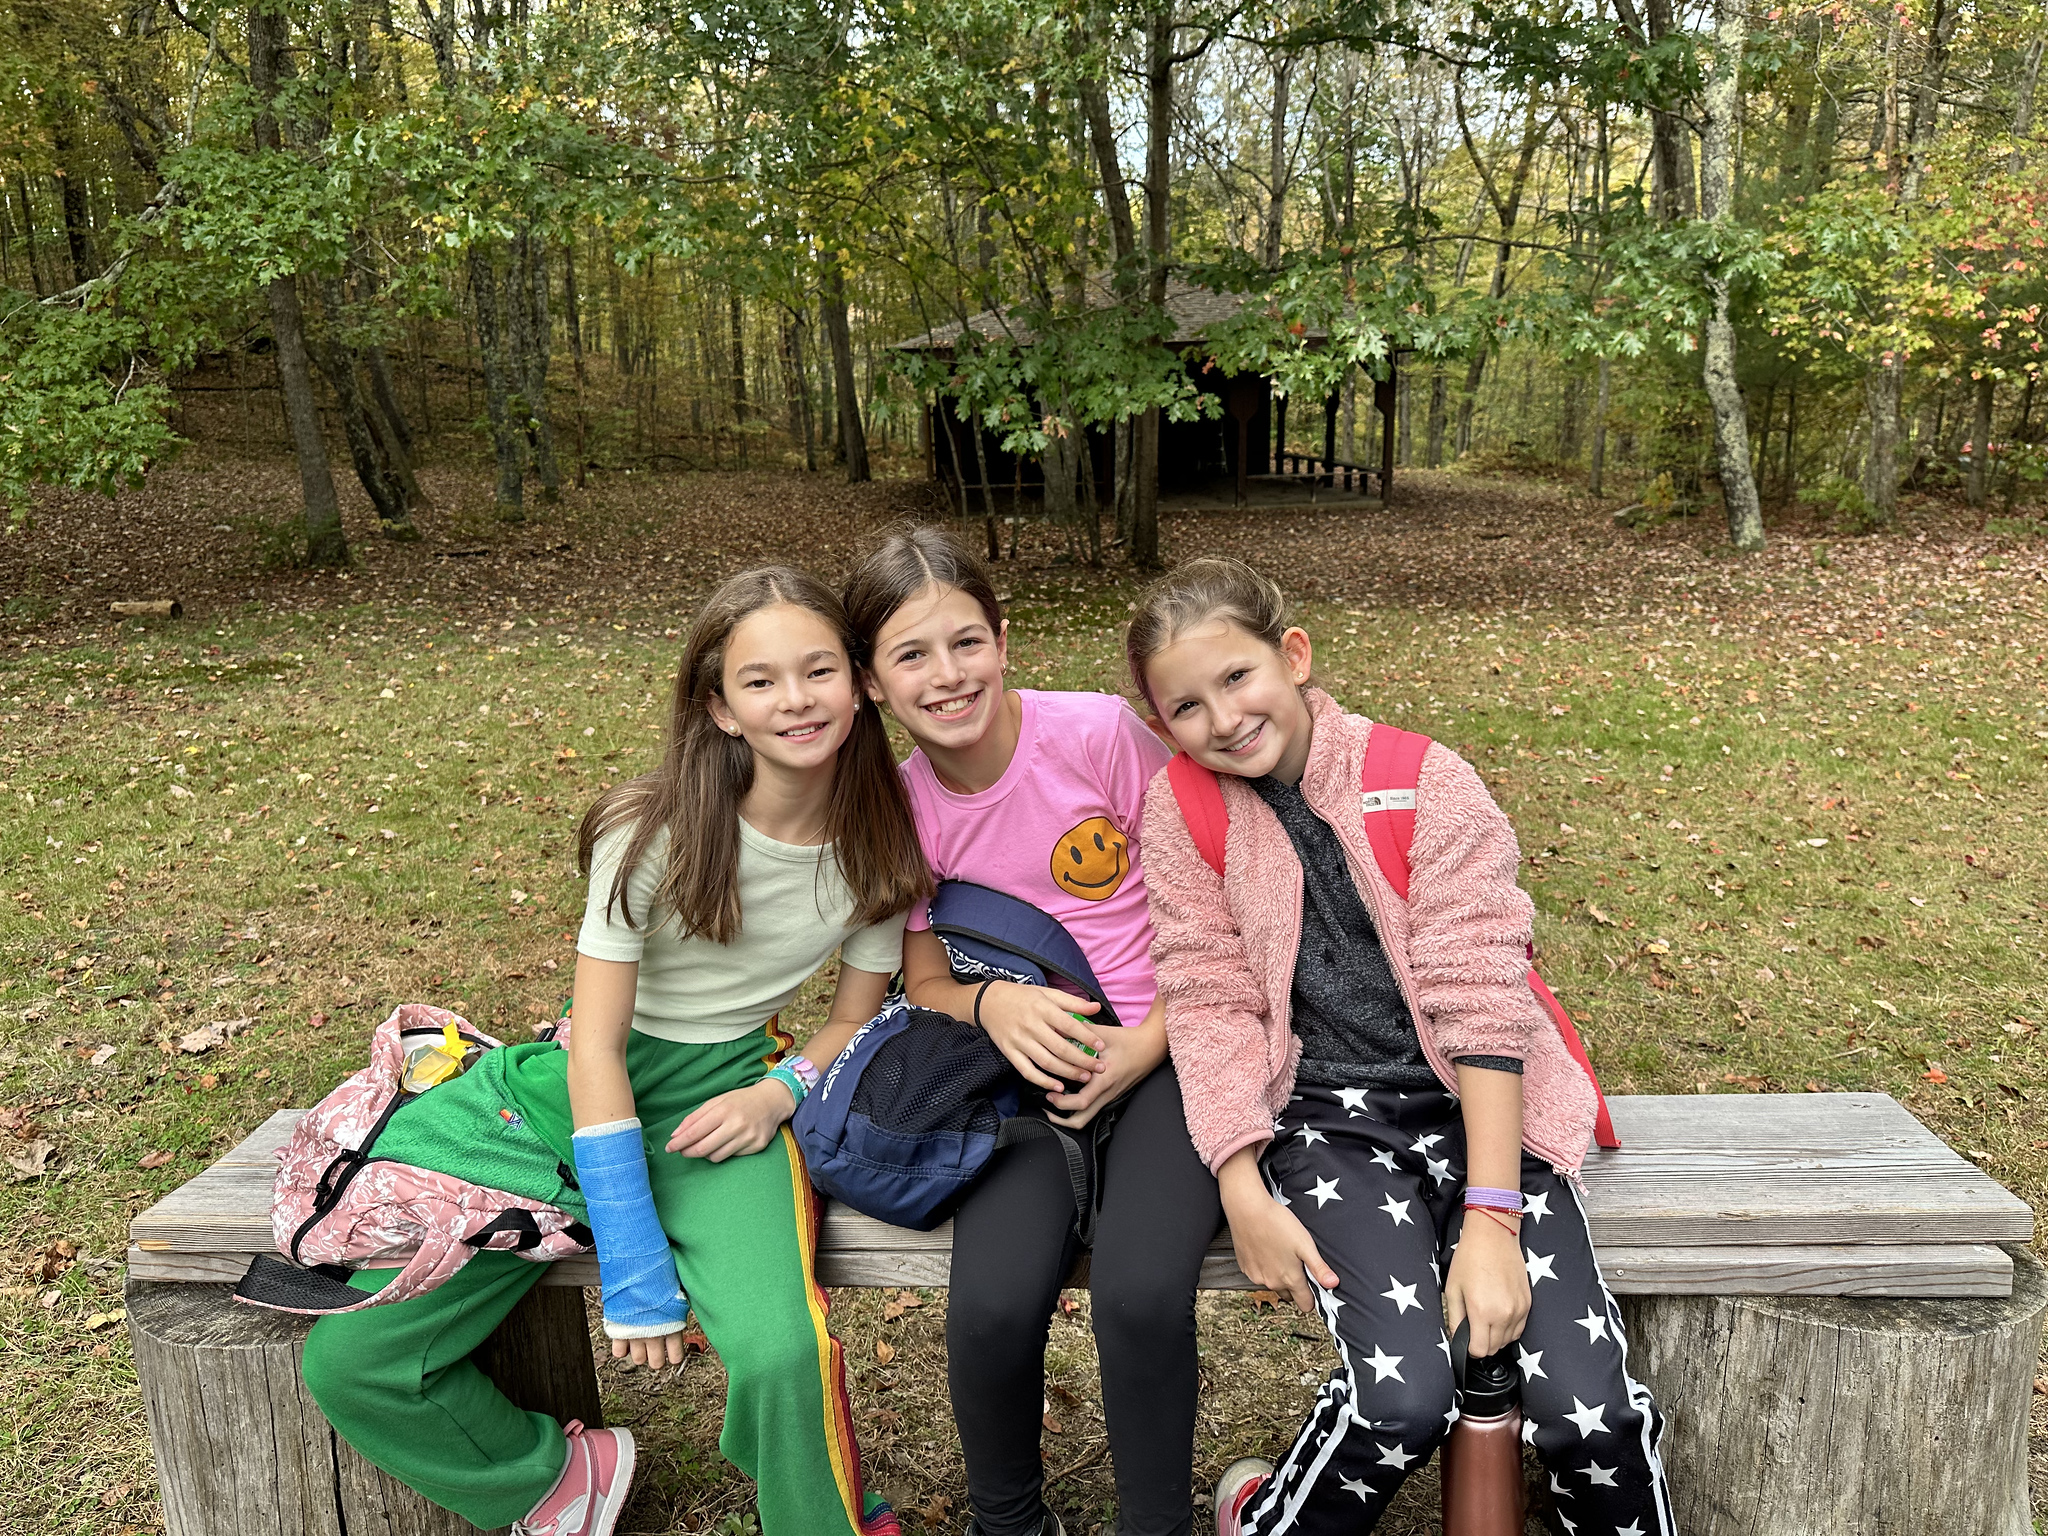 Ethical culture students pose and smile together around firepit at Nature's Classroom.